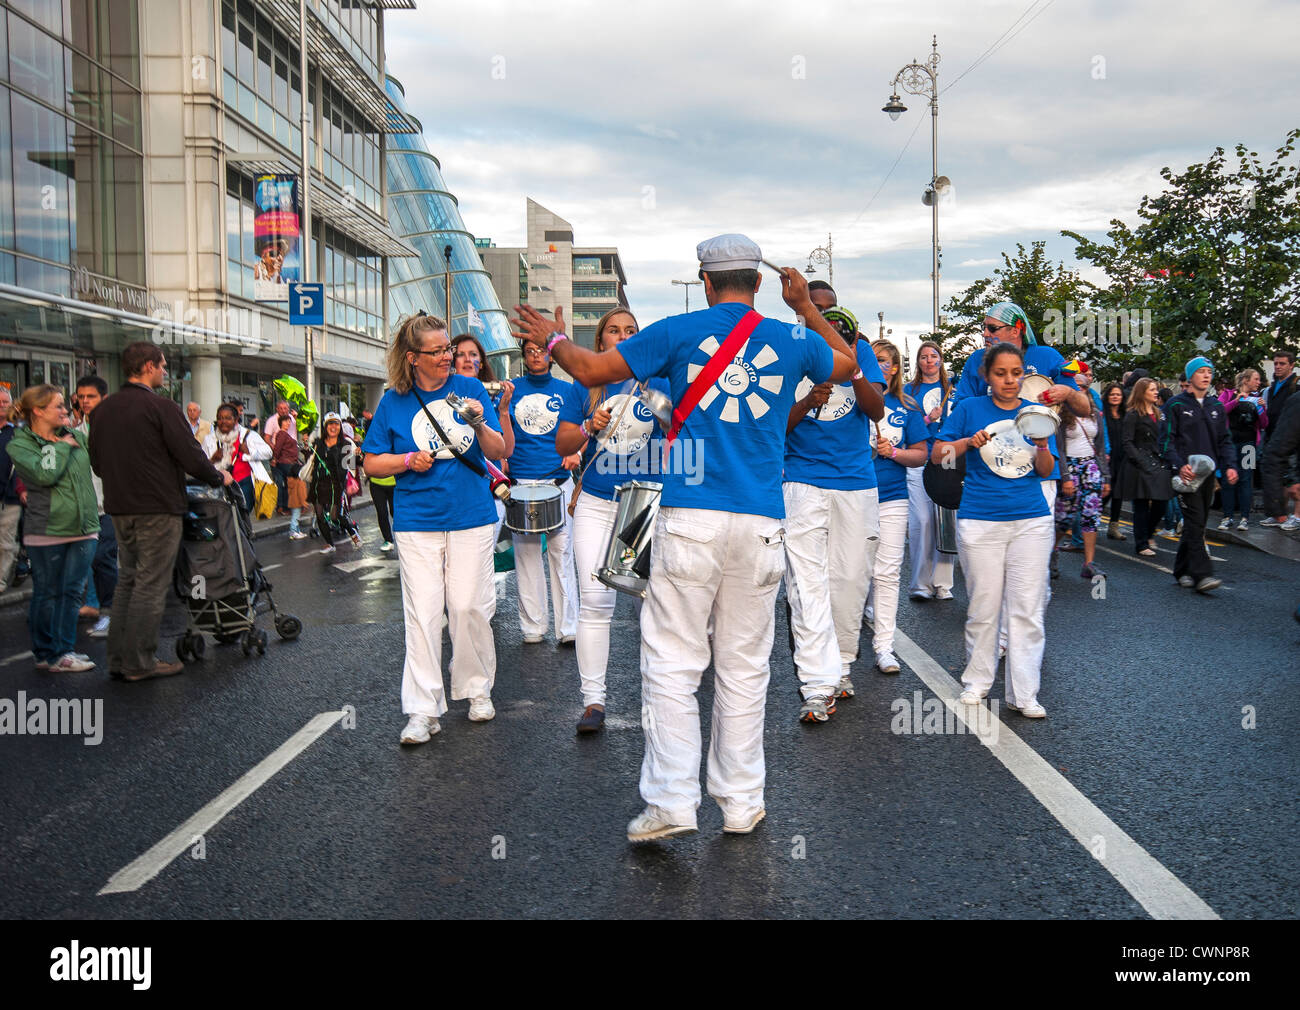 Morro 16 samba drumming group perform on the streets of Dublin at the Tall Ships Festival 2012 Stock Photo